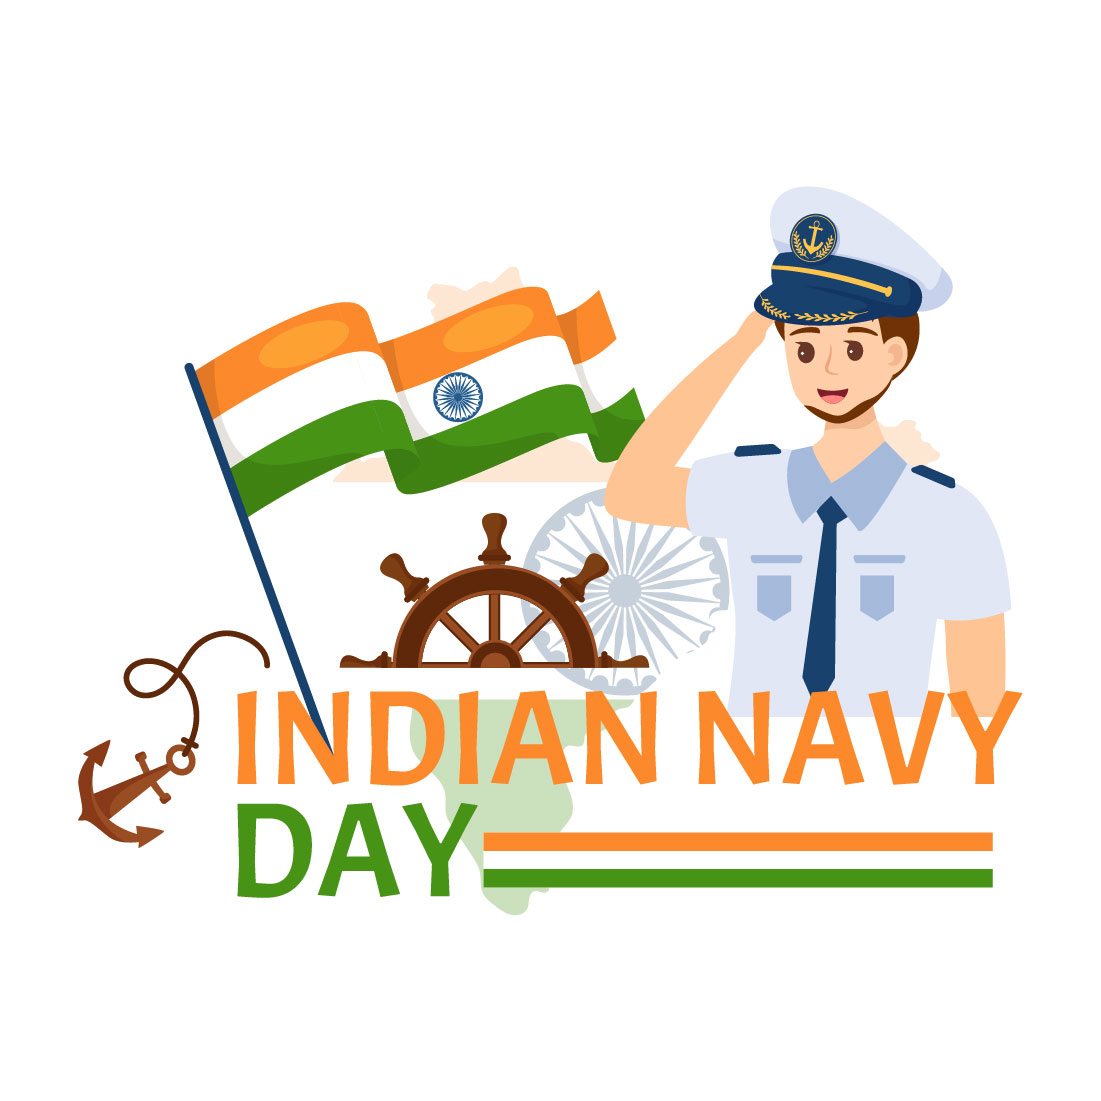 13 Indian Navy Day Illustration cover image.